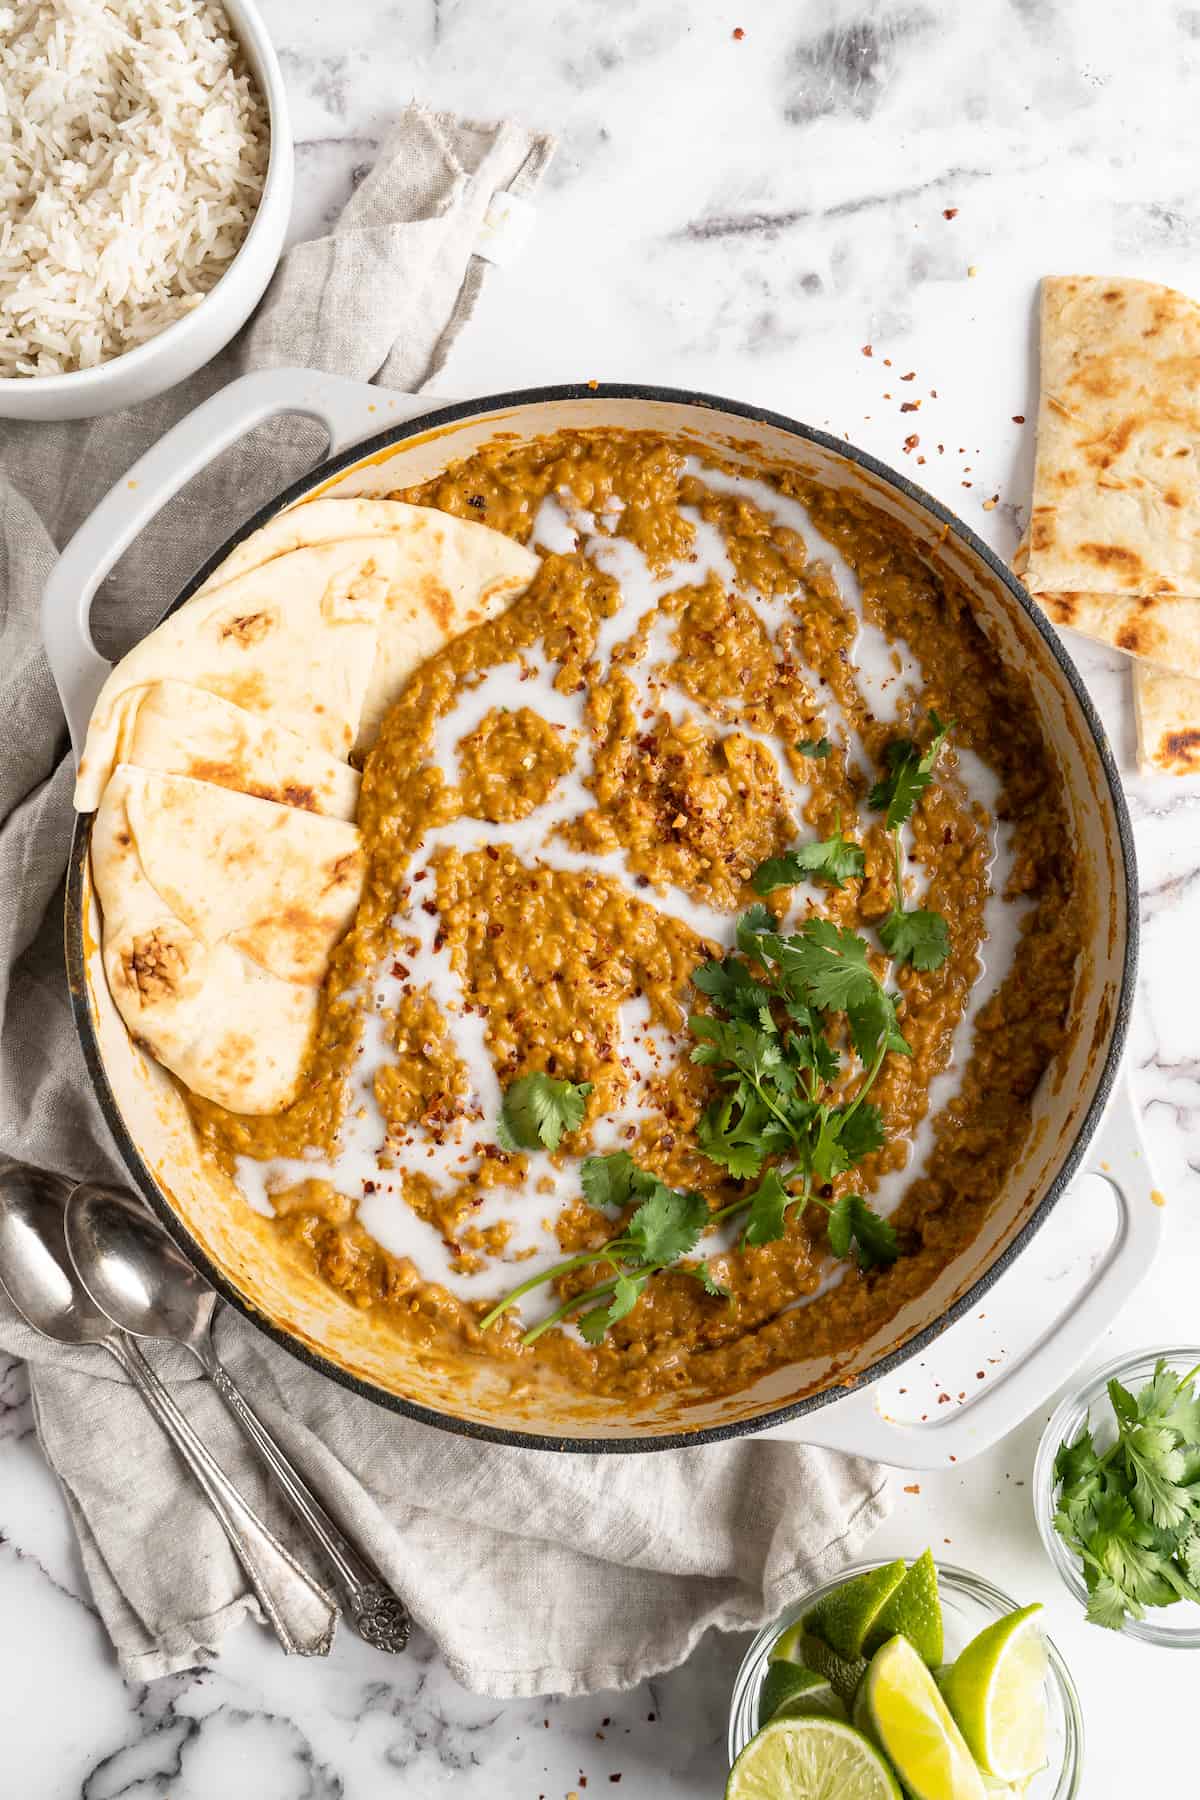 Pot of red lentil curry garnished with naan and cilantro